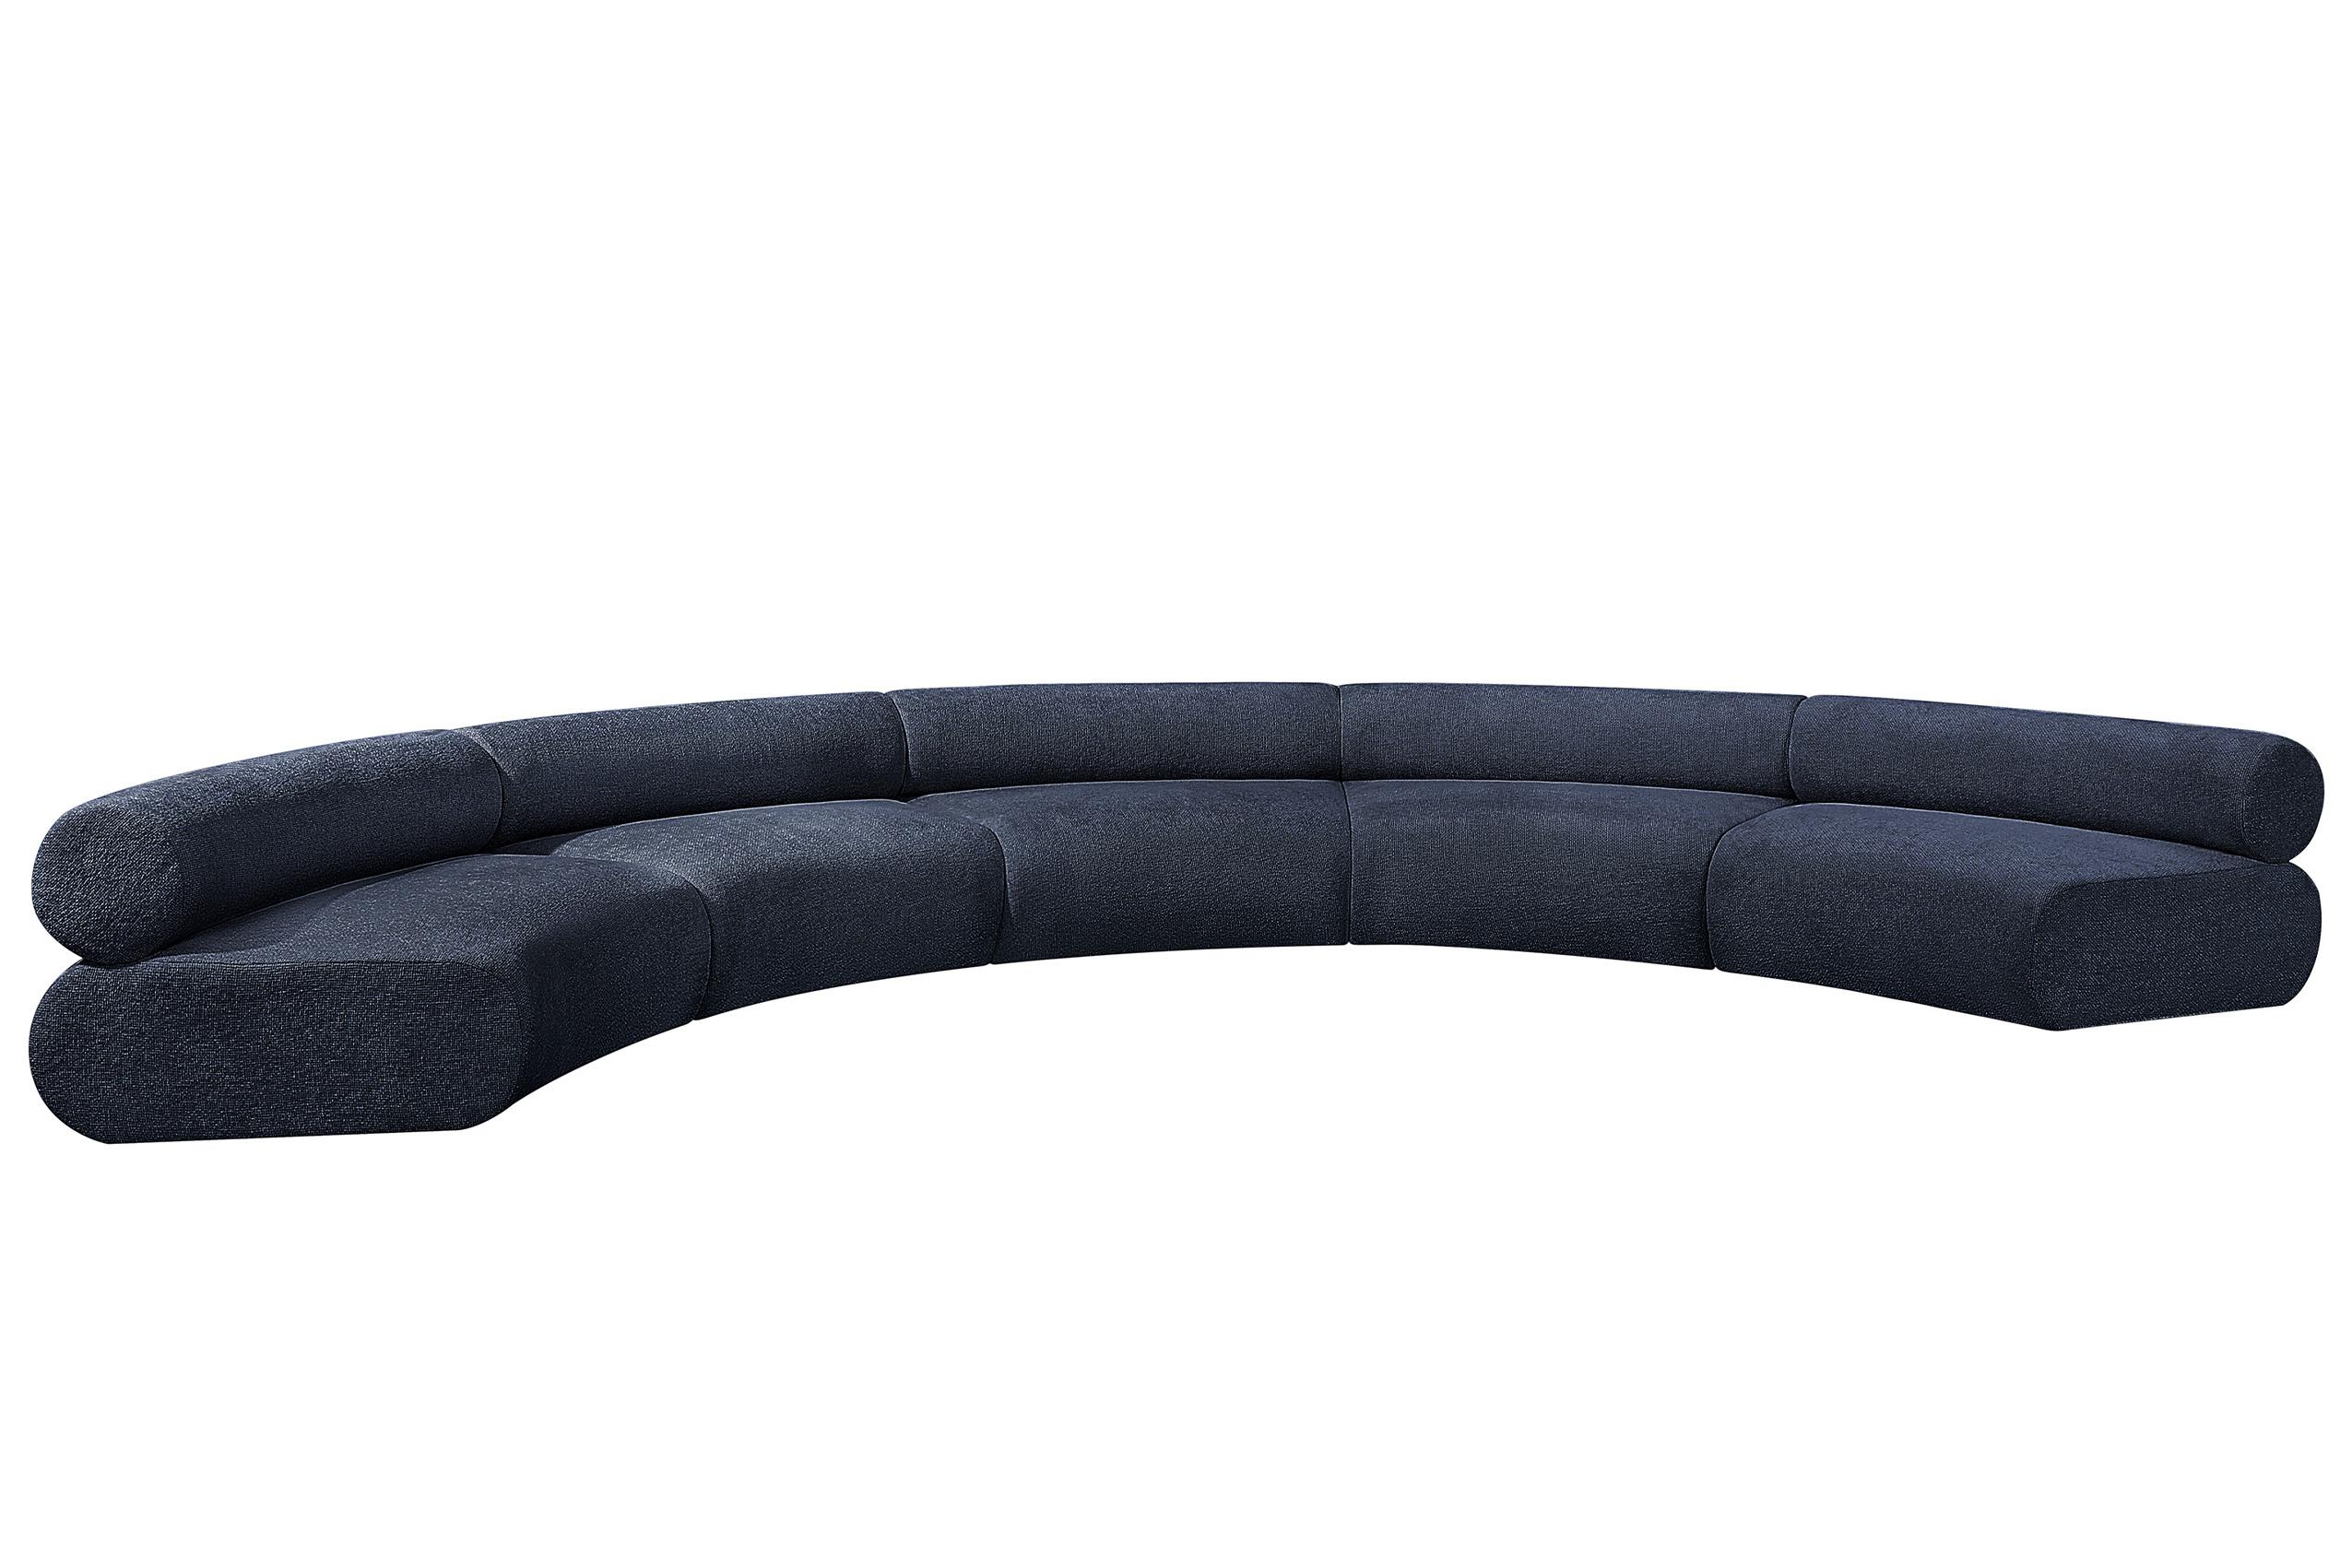 Contemporary, Modern Modular Sectional Sofa Bale 114Navy-S5A 114Navy-S5A in Navy Chenille